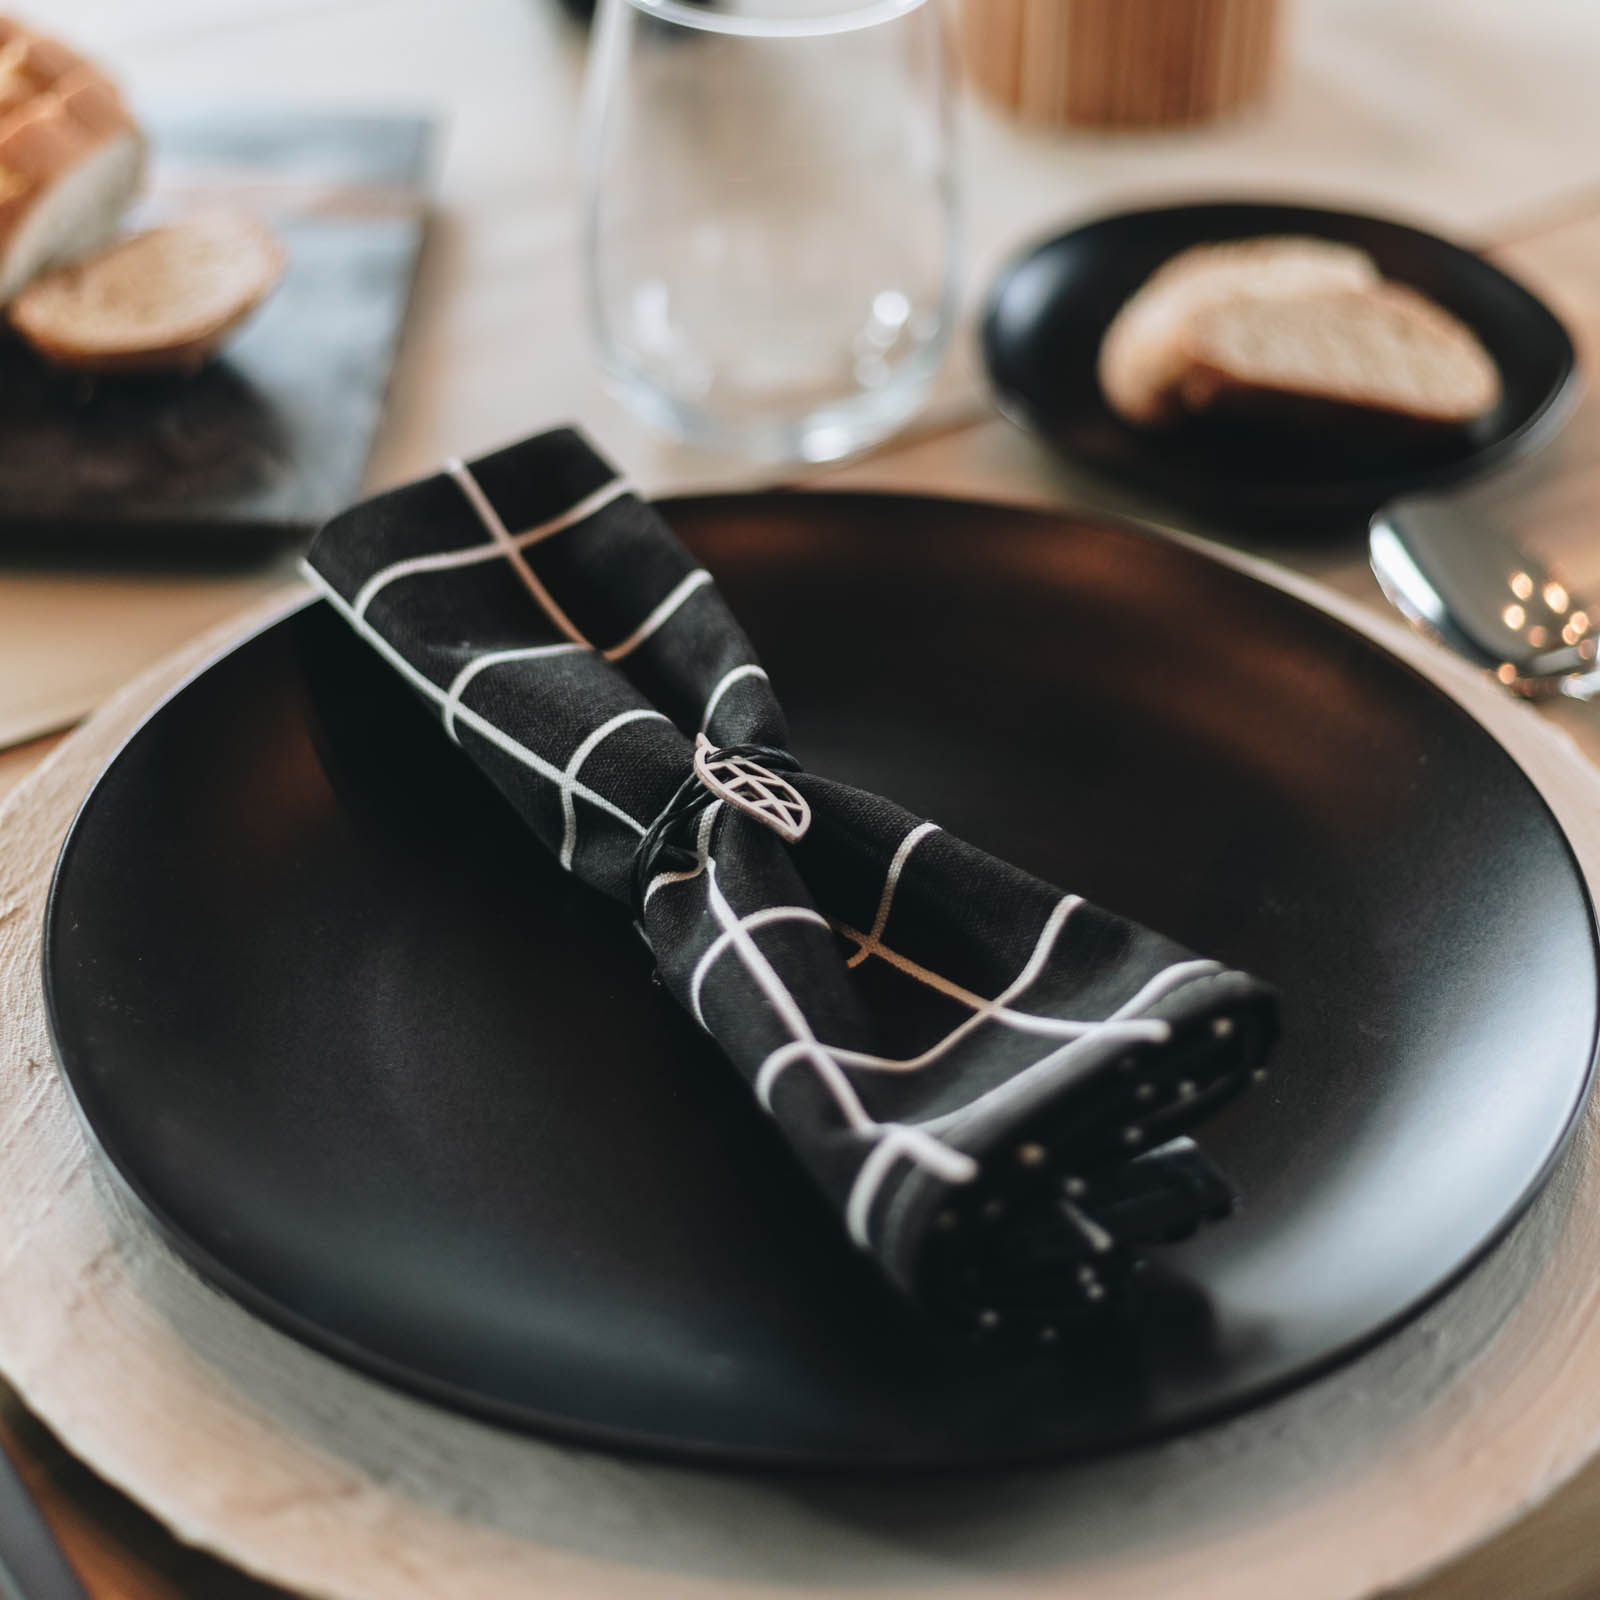 place setting with white charger, black plate, black patterned napkin and minimalist napkin rings